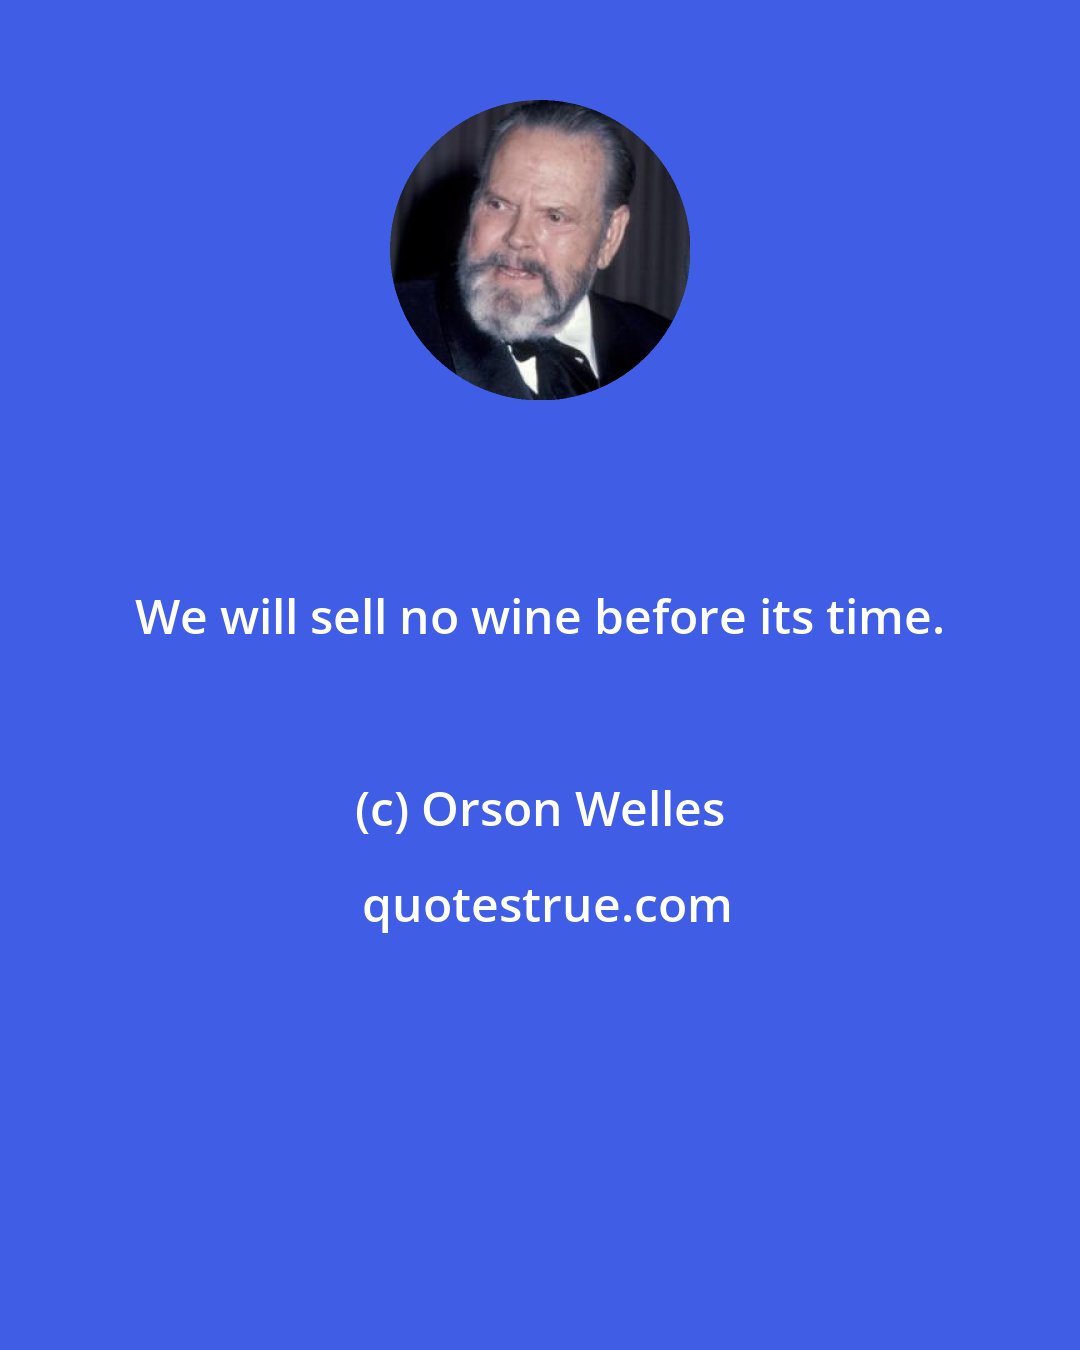 Orson Welles: We will sell no wine before its time.